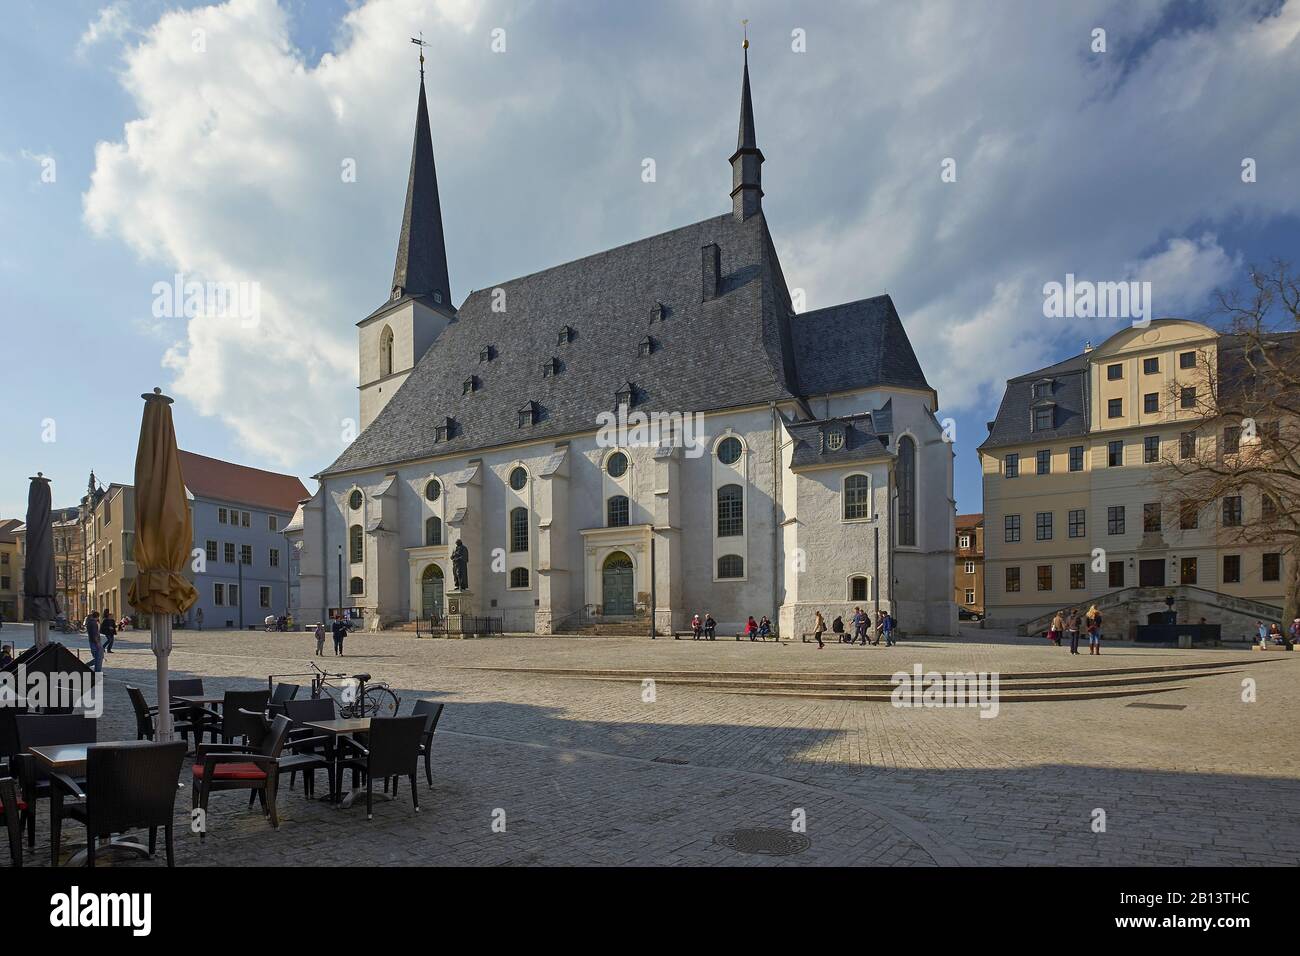 Herderplatz with Herder Church in Weimar,Thuringia,Germany Stock Photo